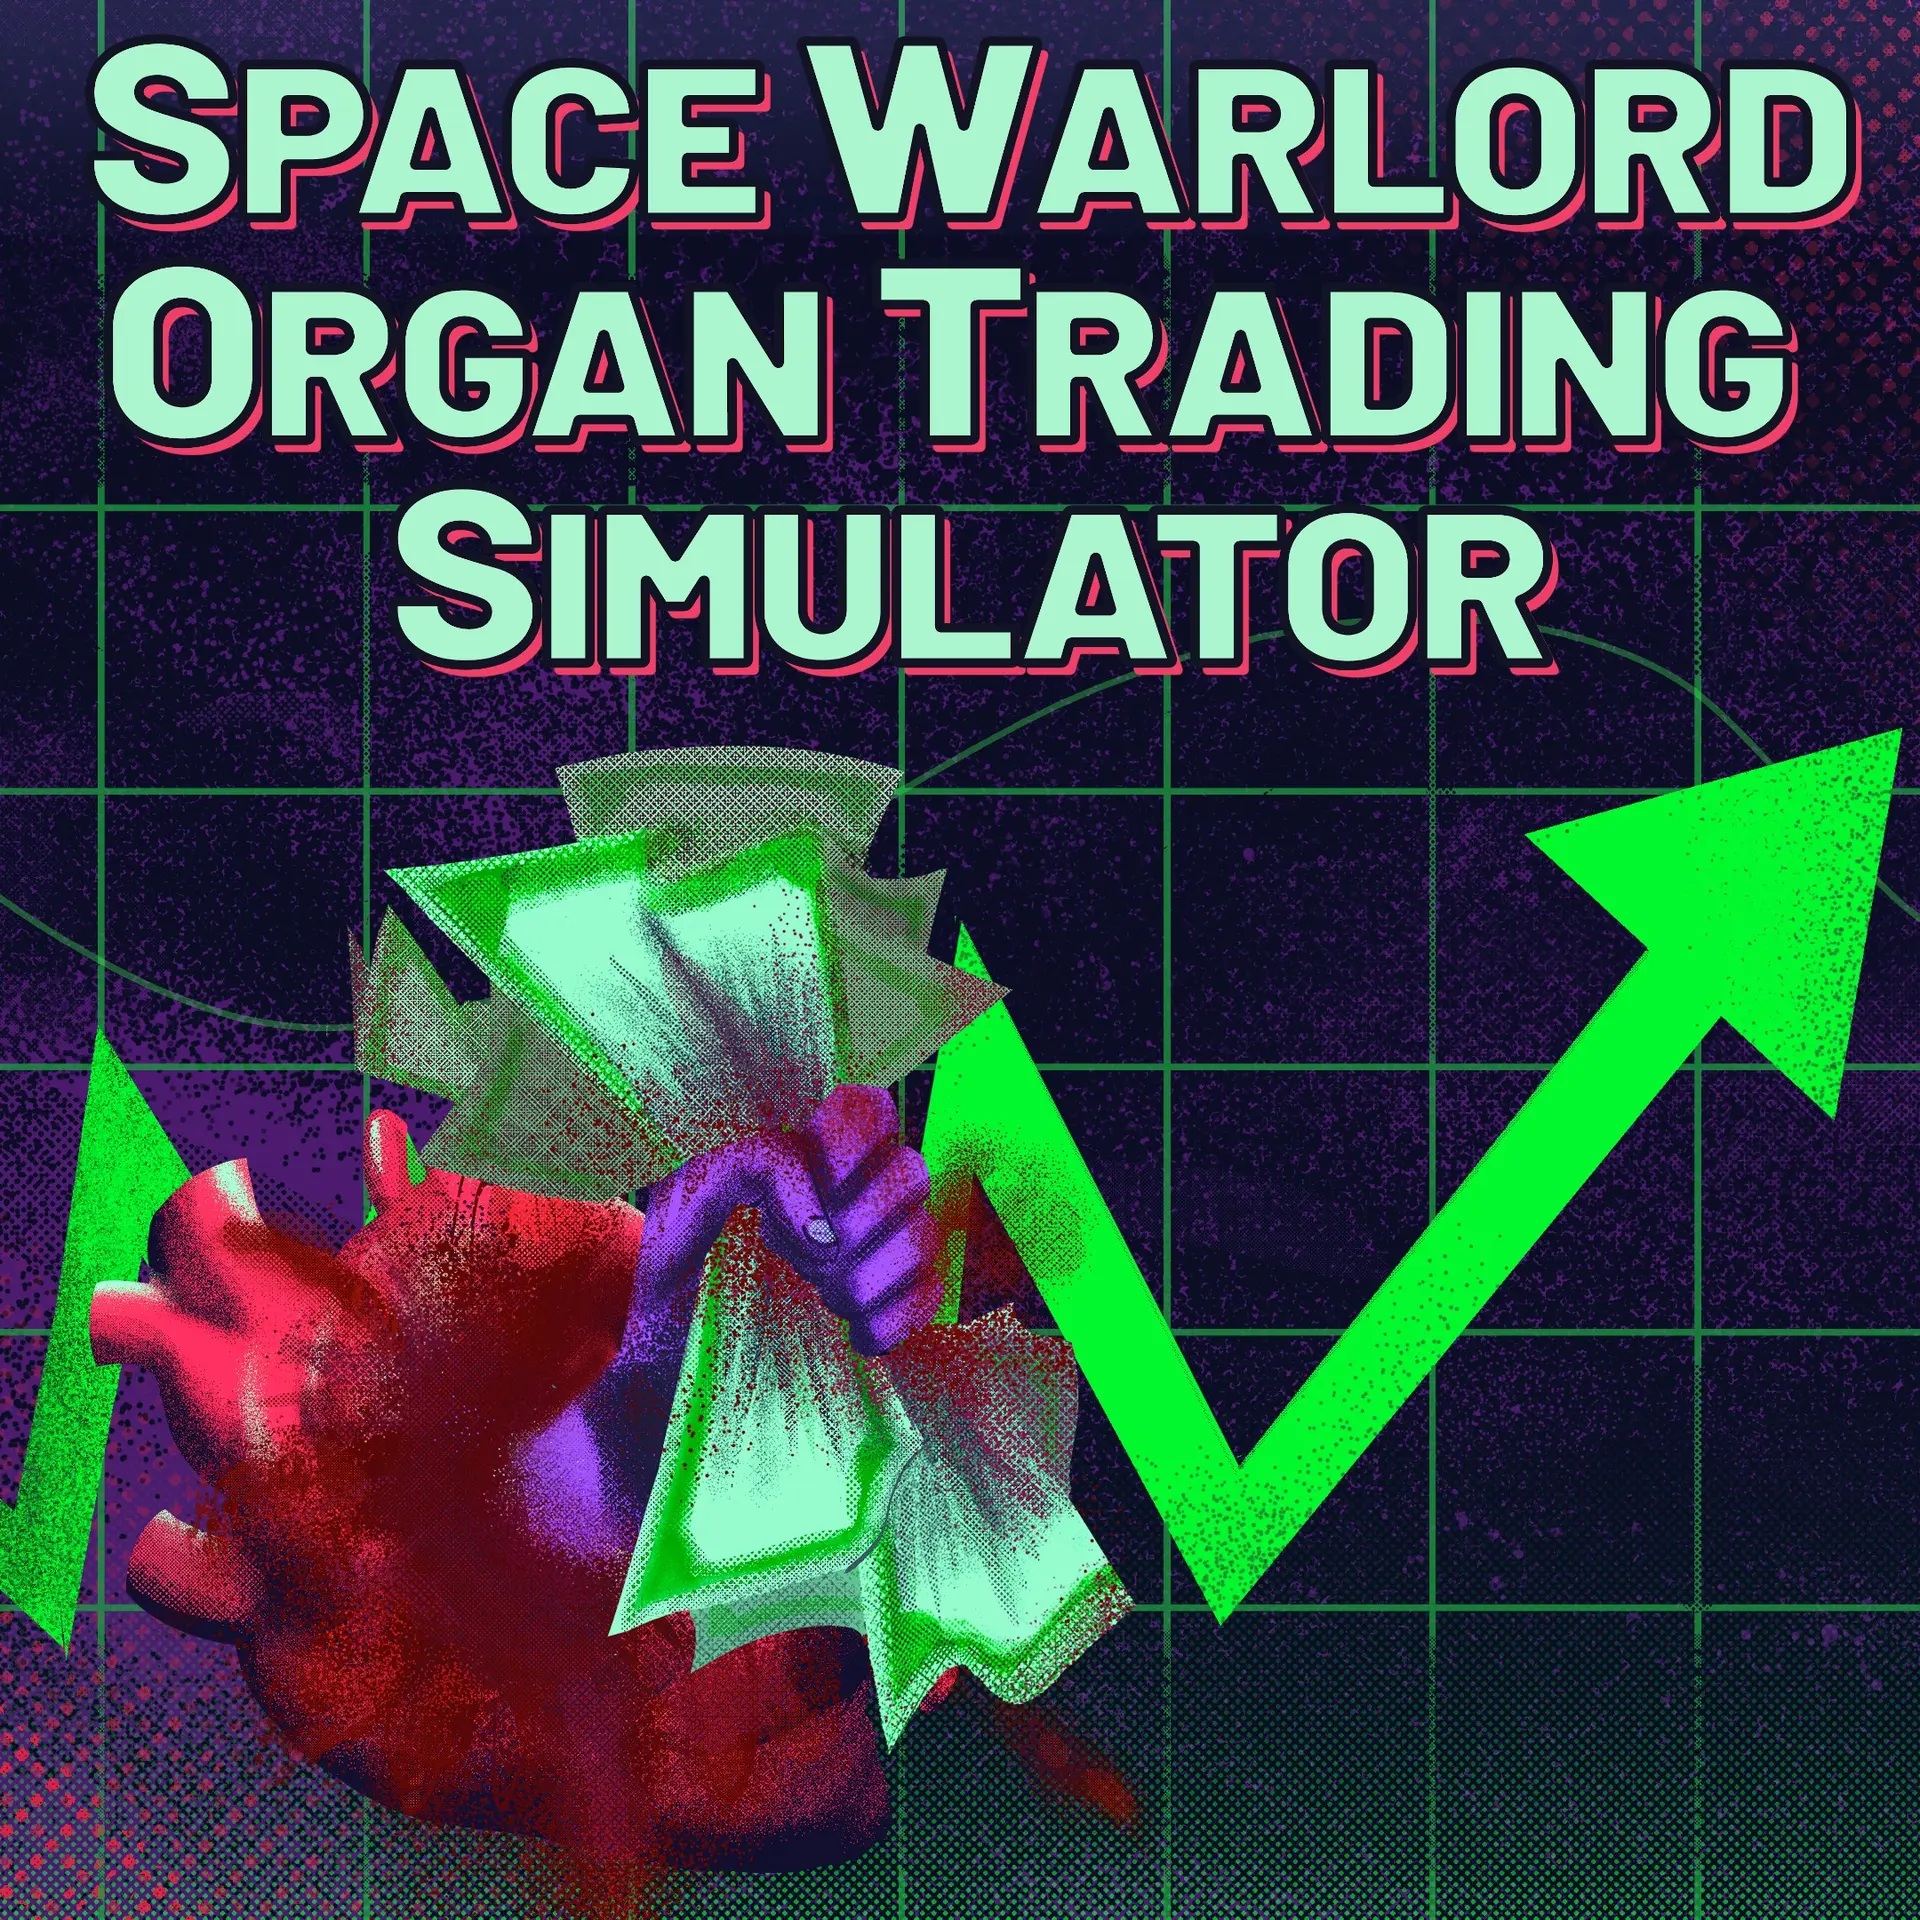 Space Warlord Organ Trading Simulator (XBOX One - Cheapest Store)